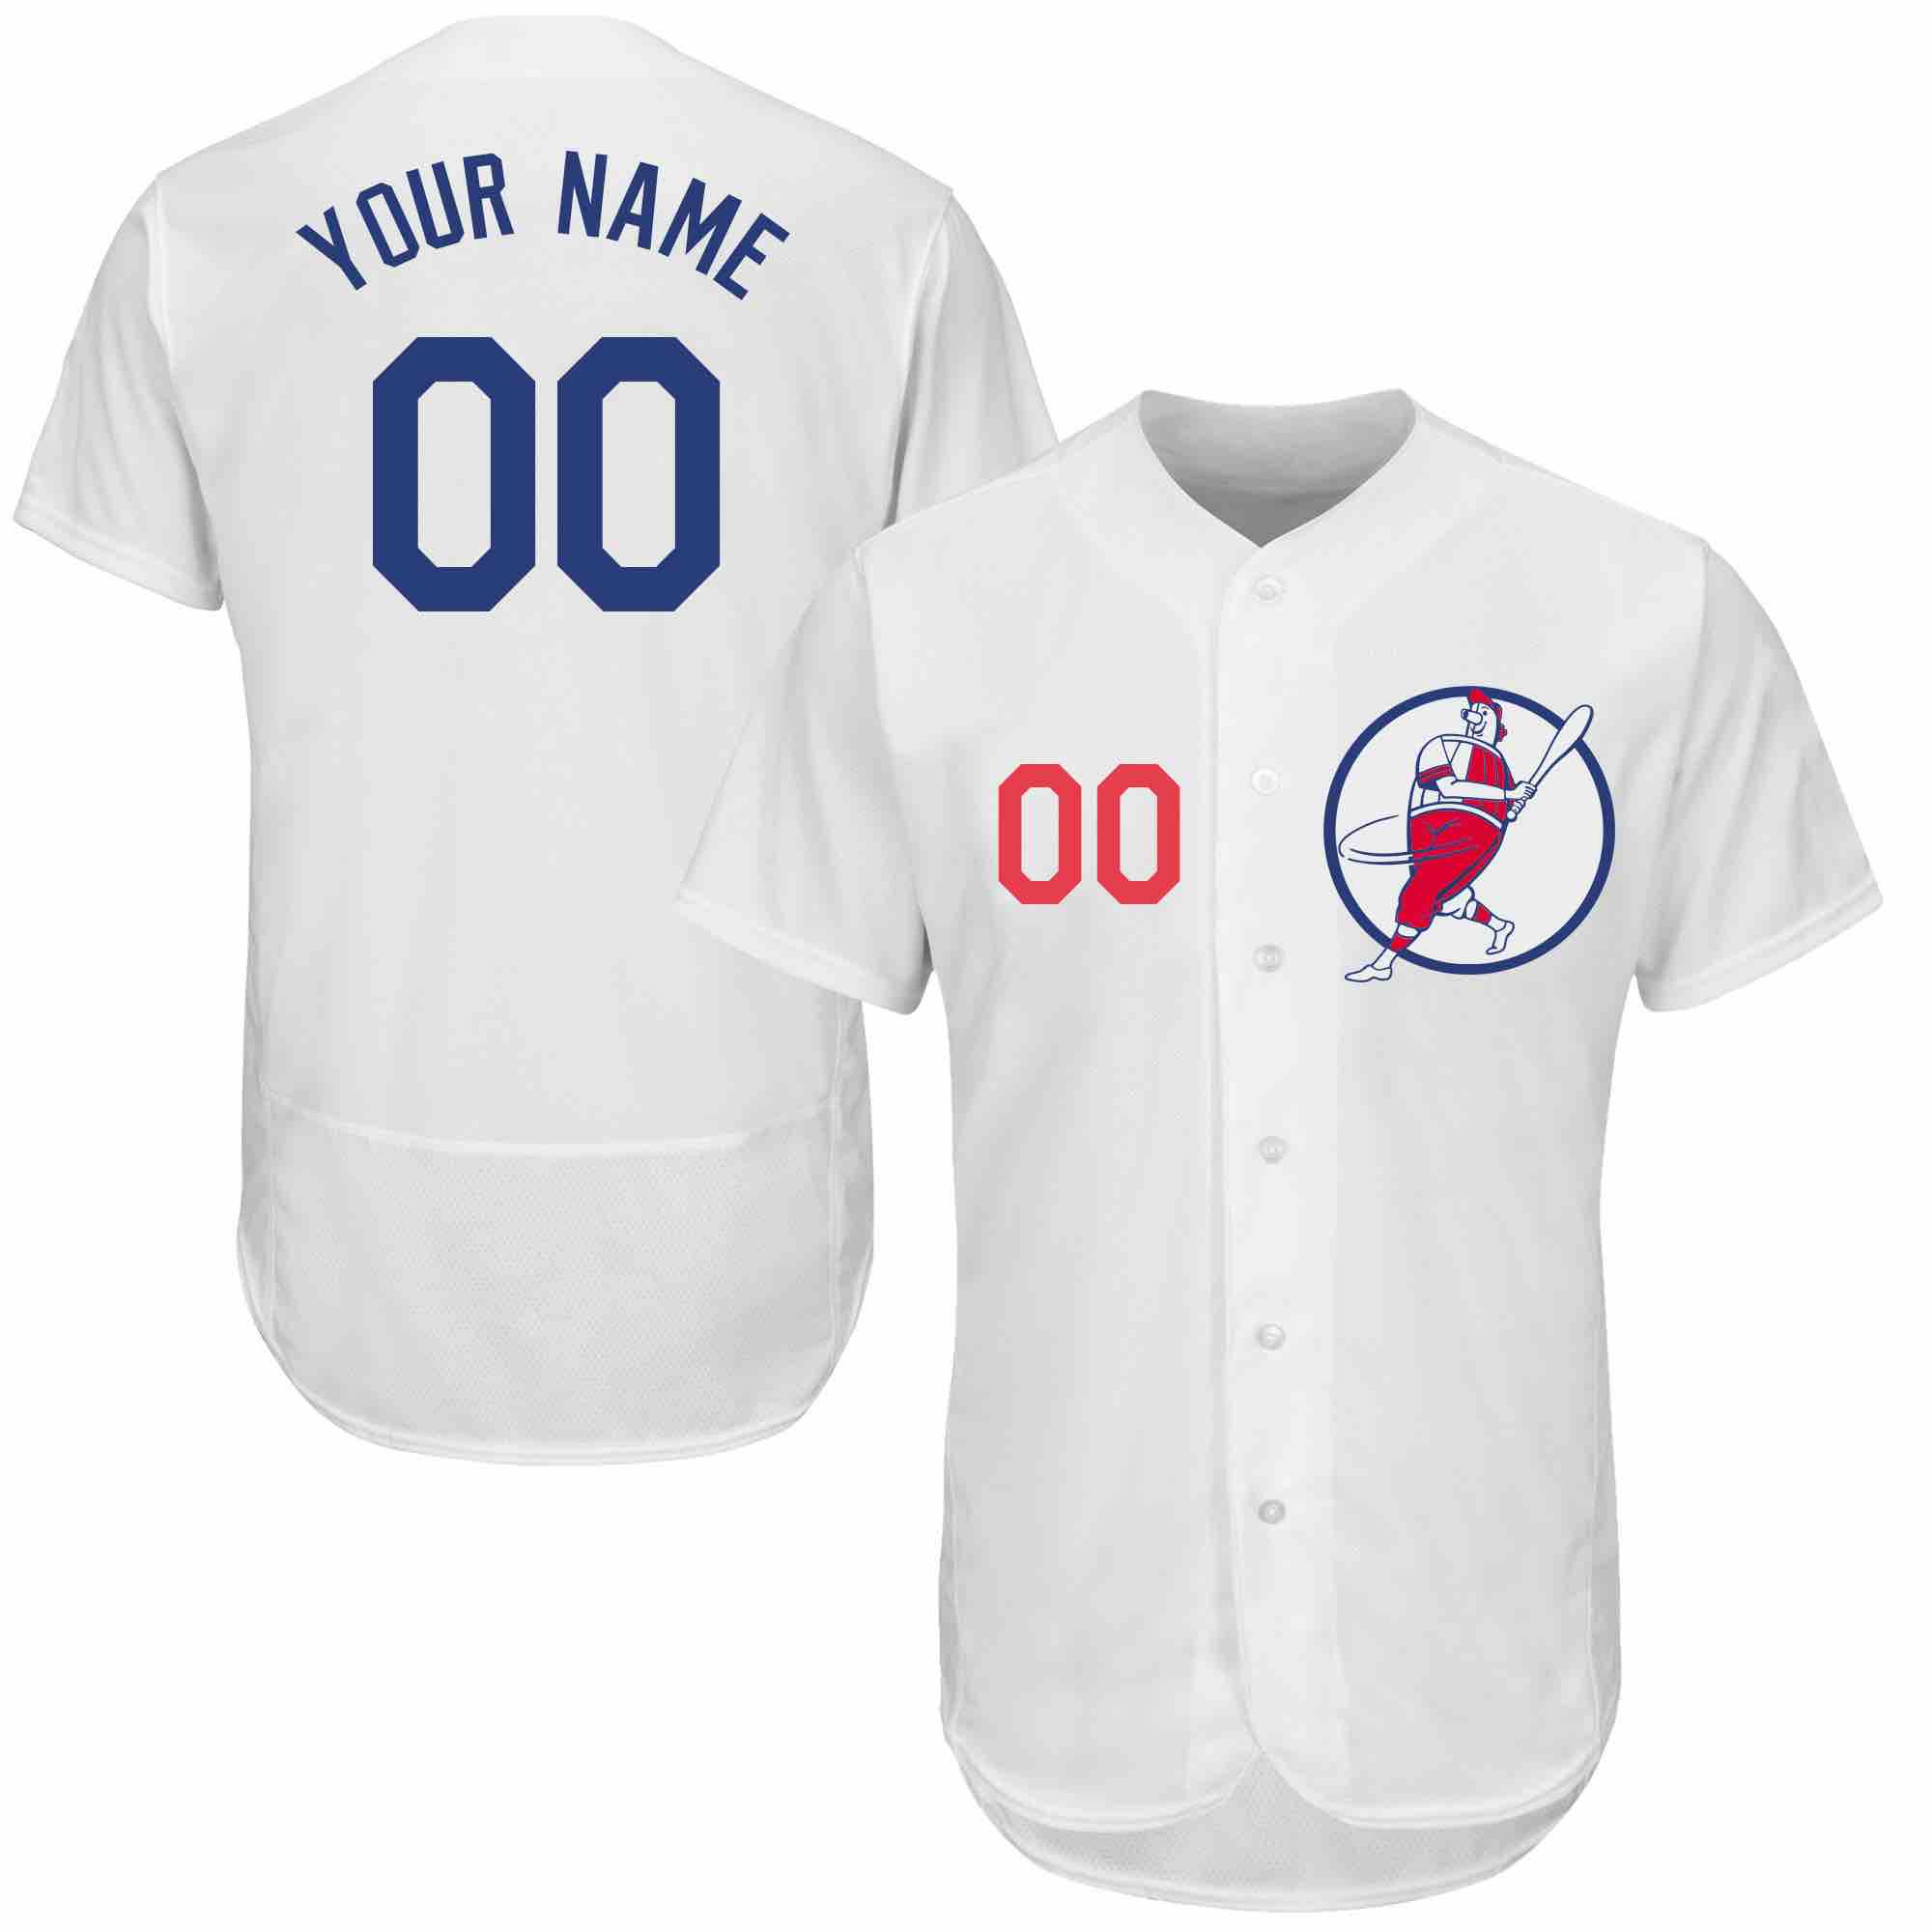 MLB Los Angeles Dodgers Personalized White Elite Jersey